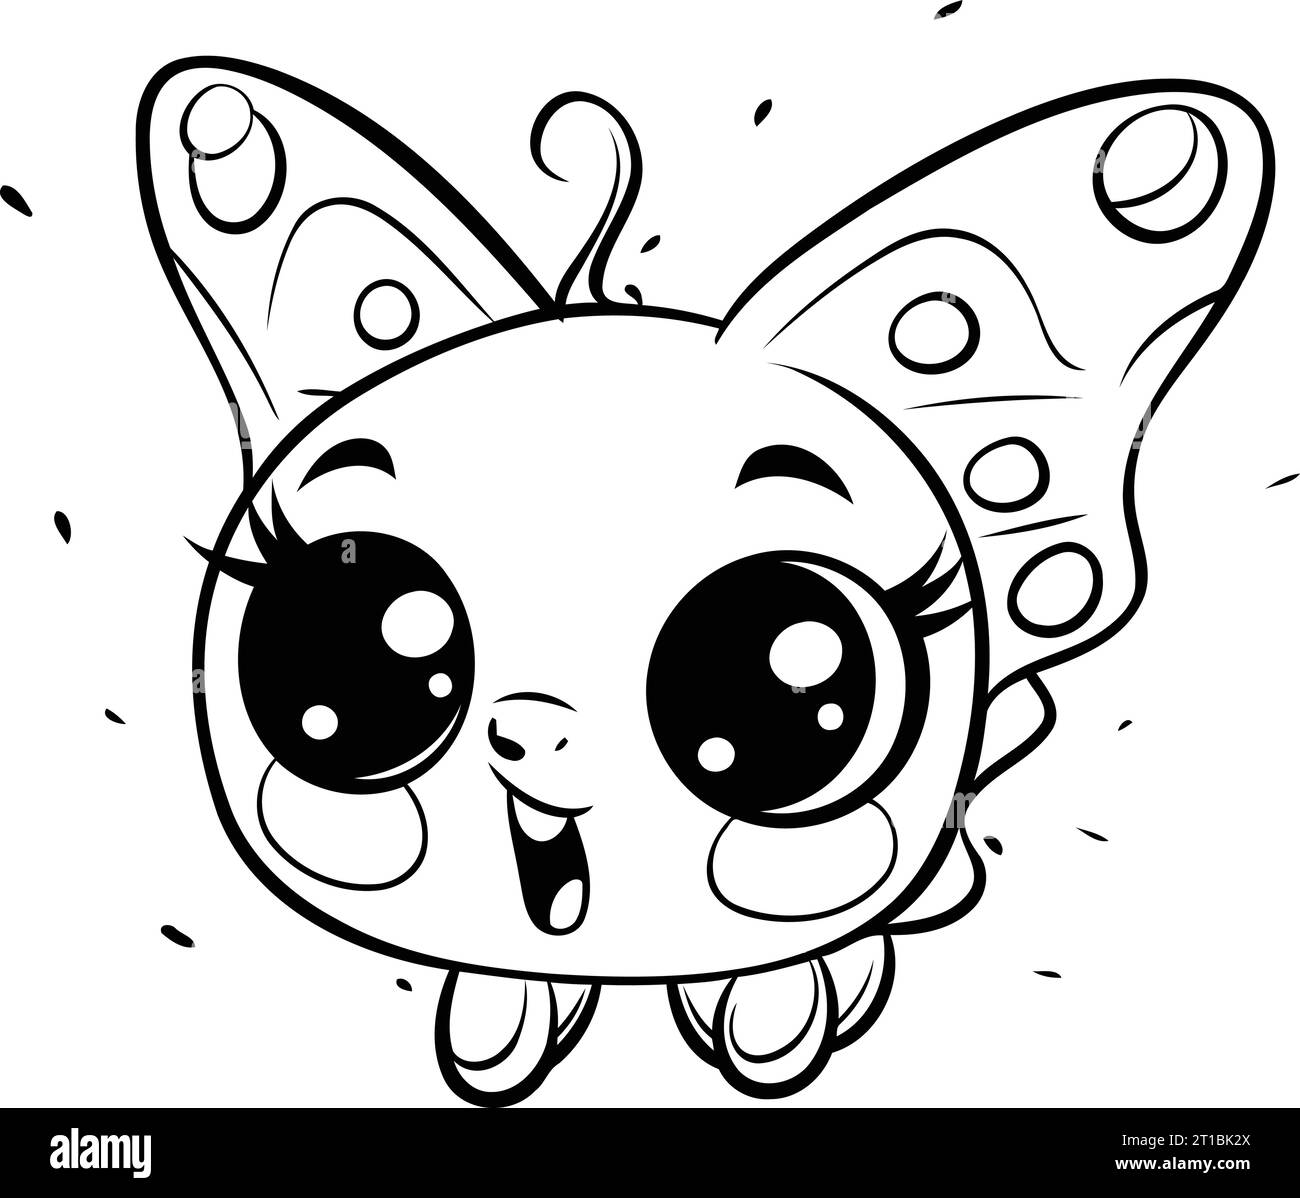 Cute cartoon butterfly. Vector illustration isolated on a white background. Stock Vector